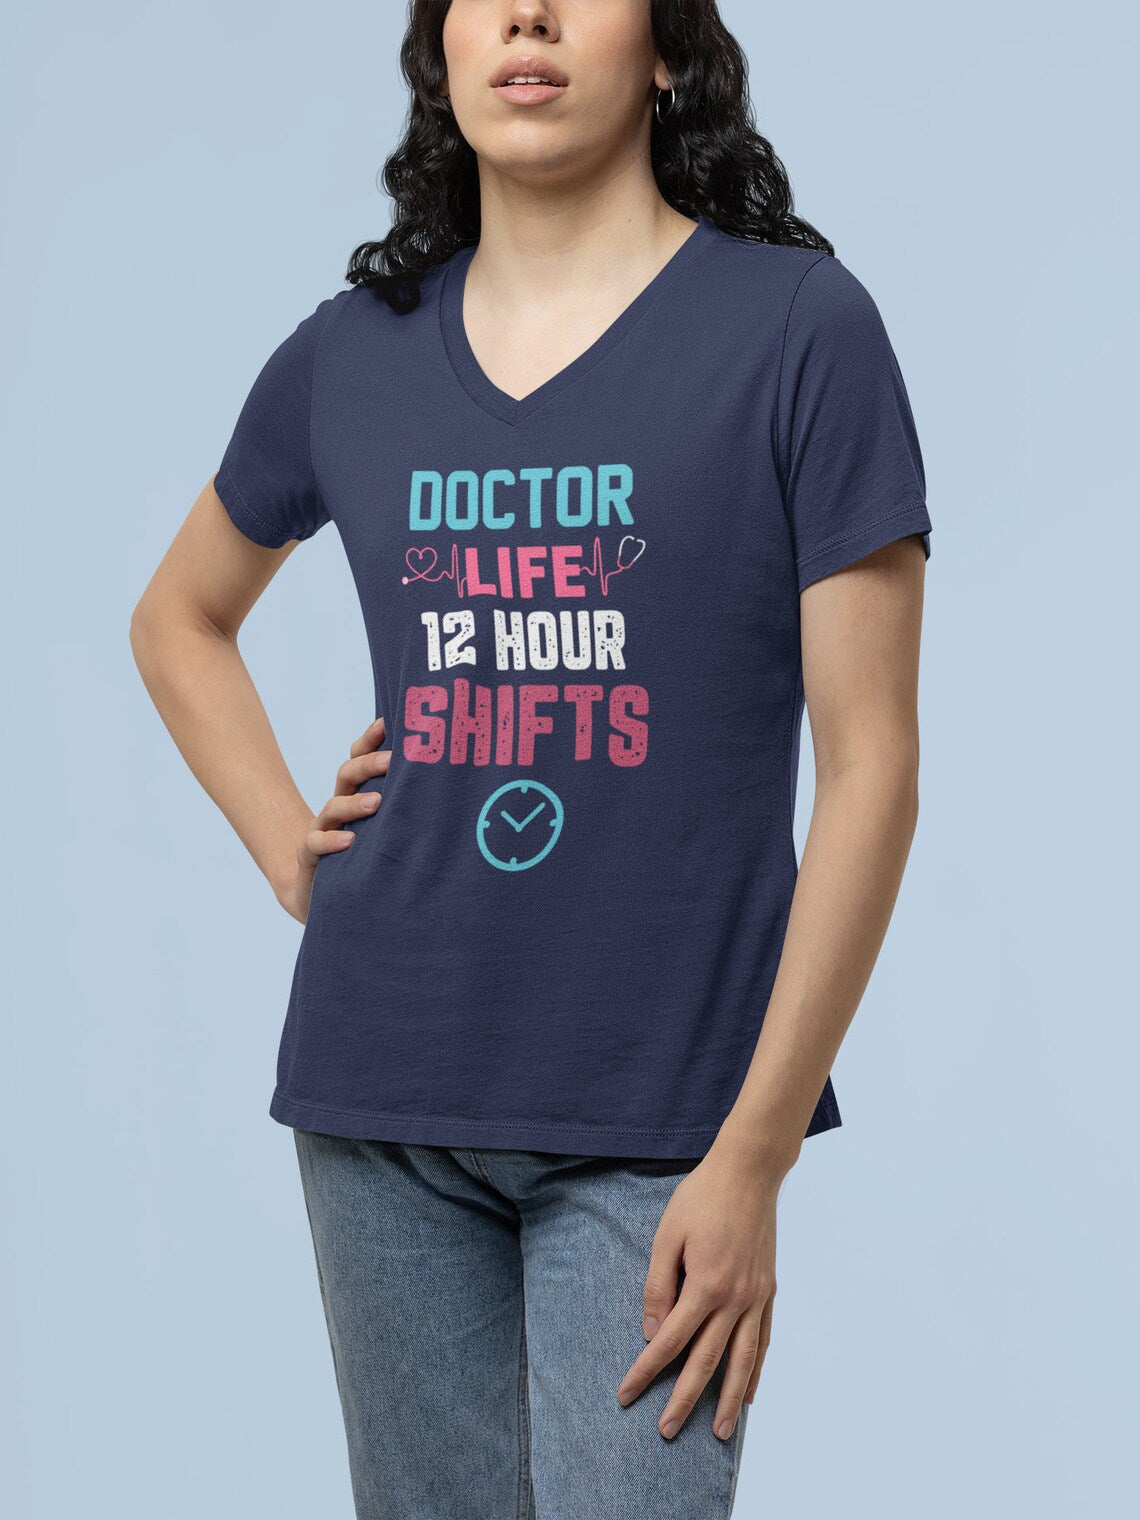 Doctor Life 12 Hour Shifts Women's Short Sleeve V-Neck Tee, Doctor shirts, Doctor gift ideas, doctors gift, women shirt with doctor design